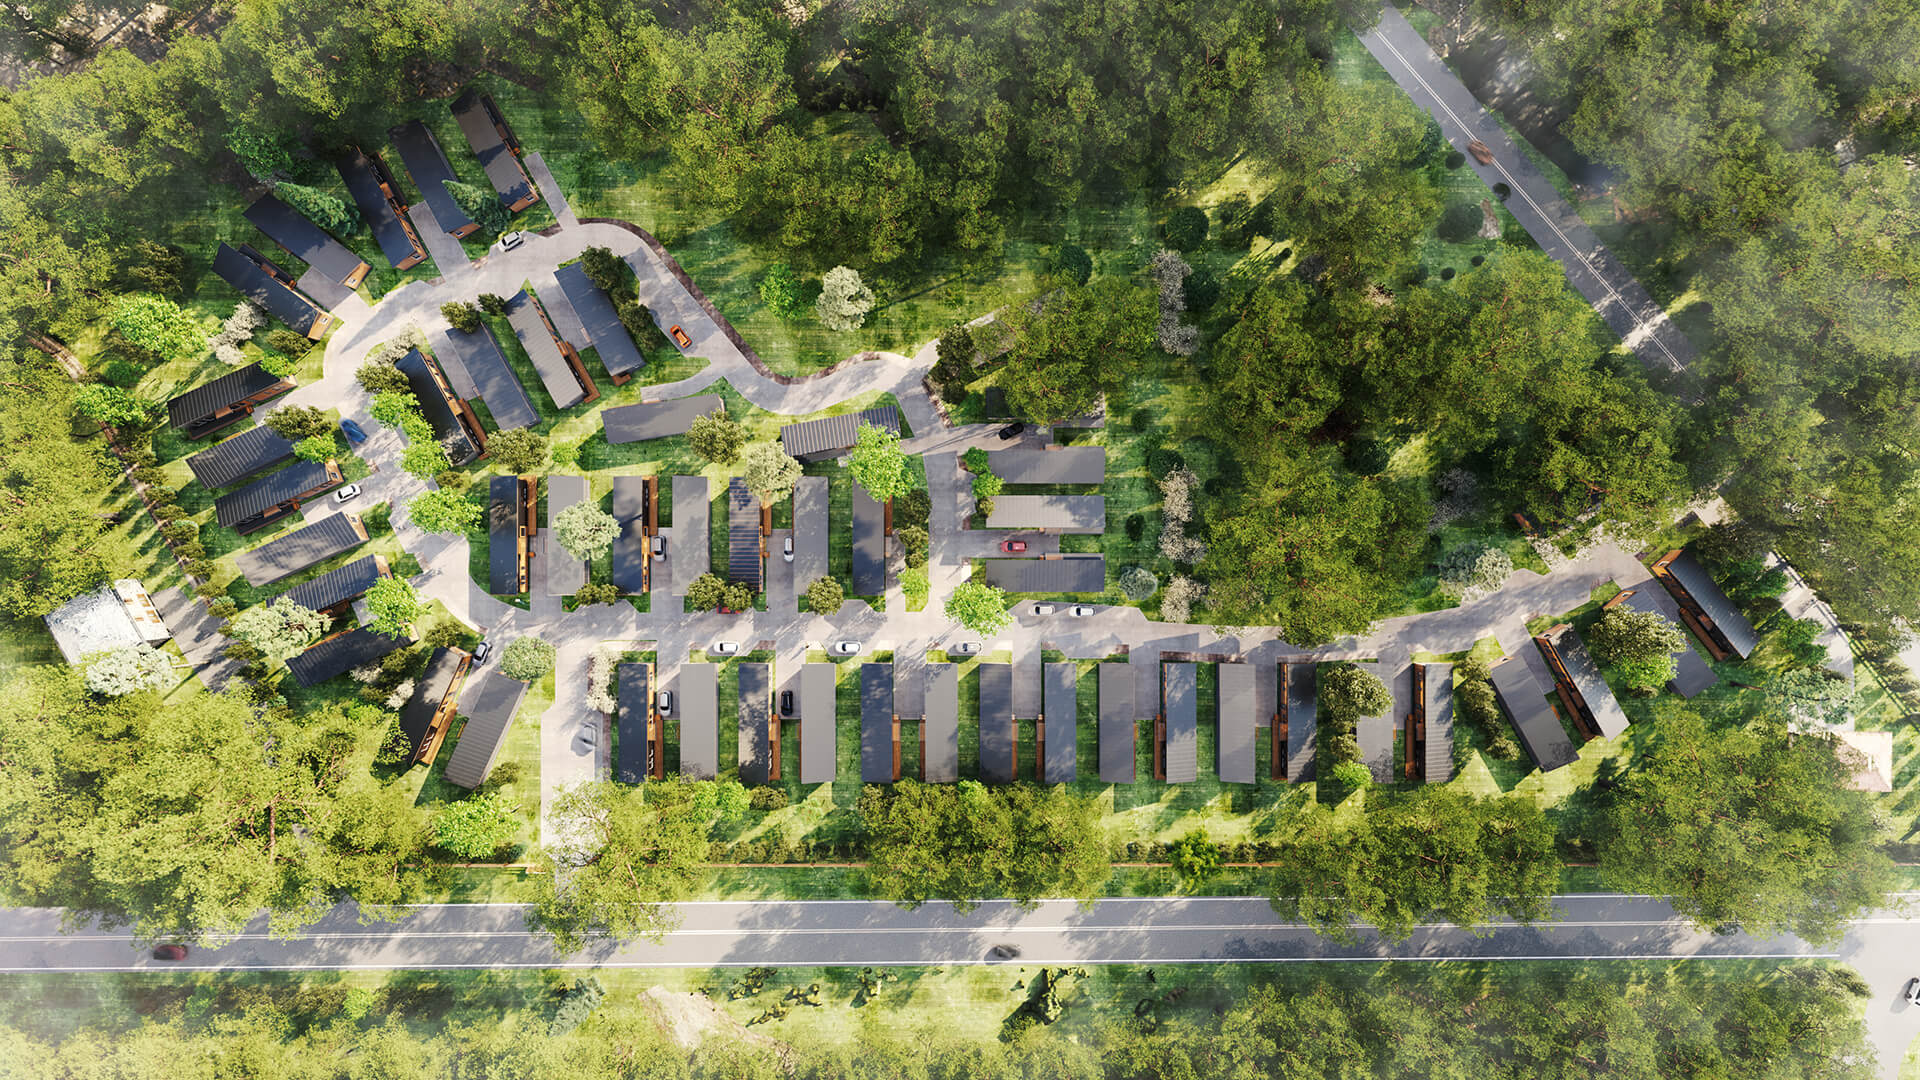 Aerial 3D Rendering of a Home Community